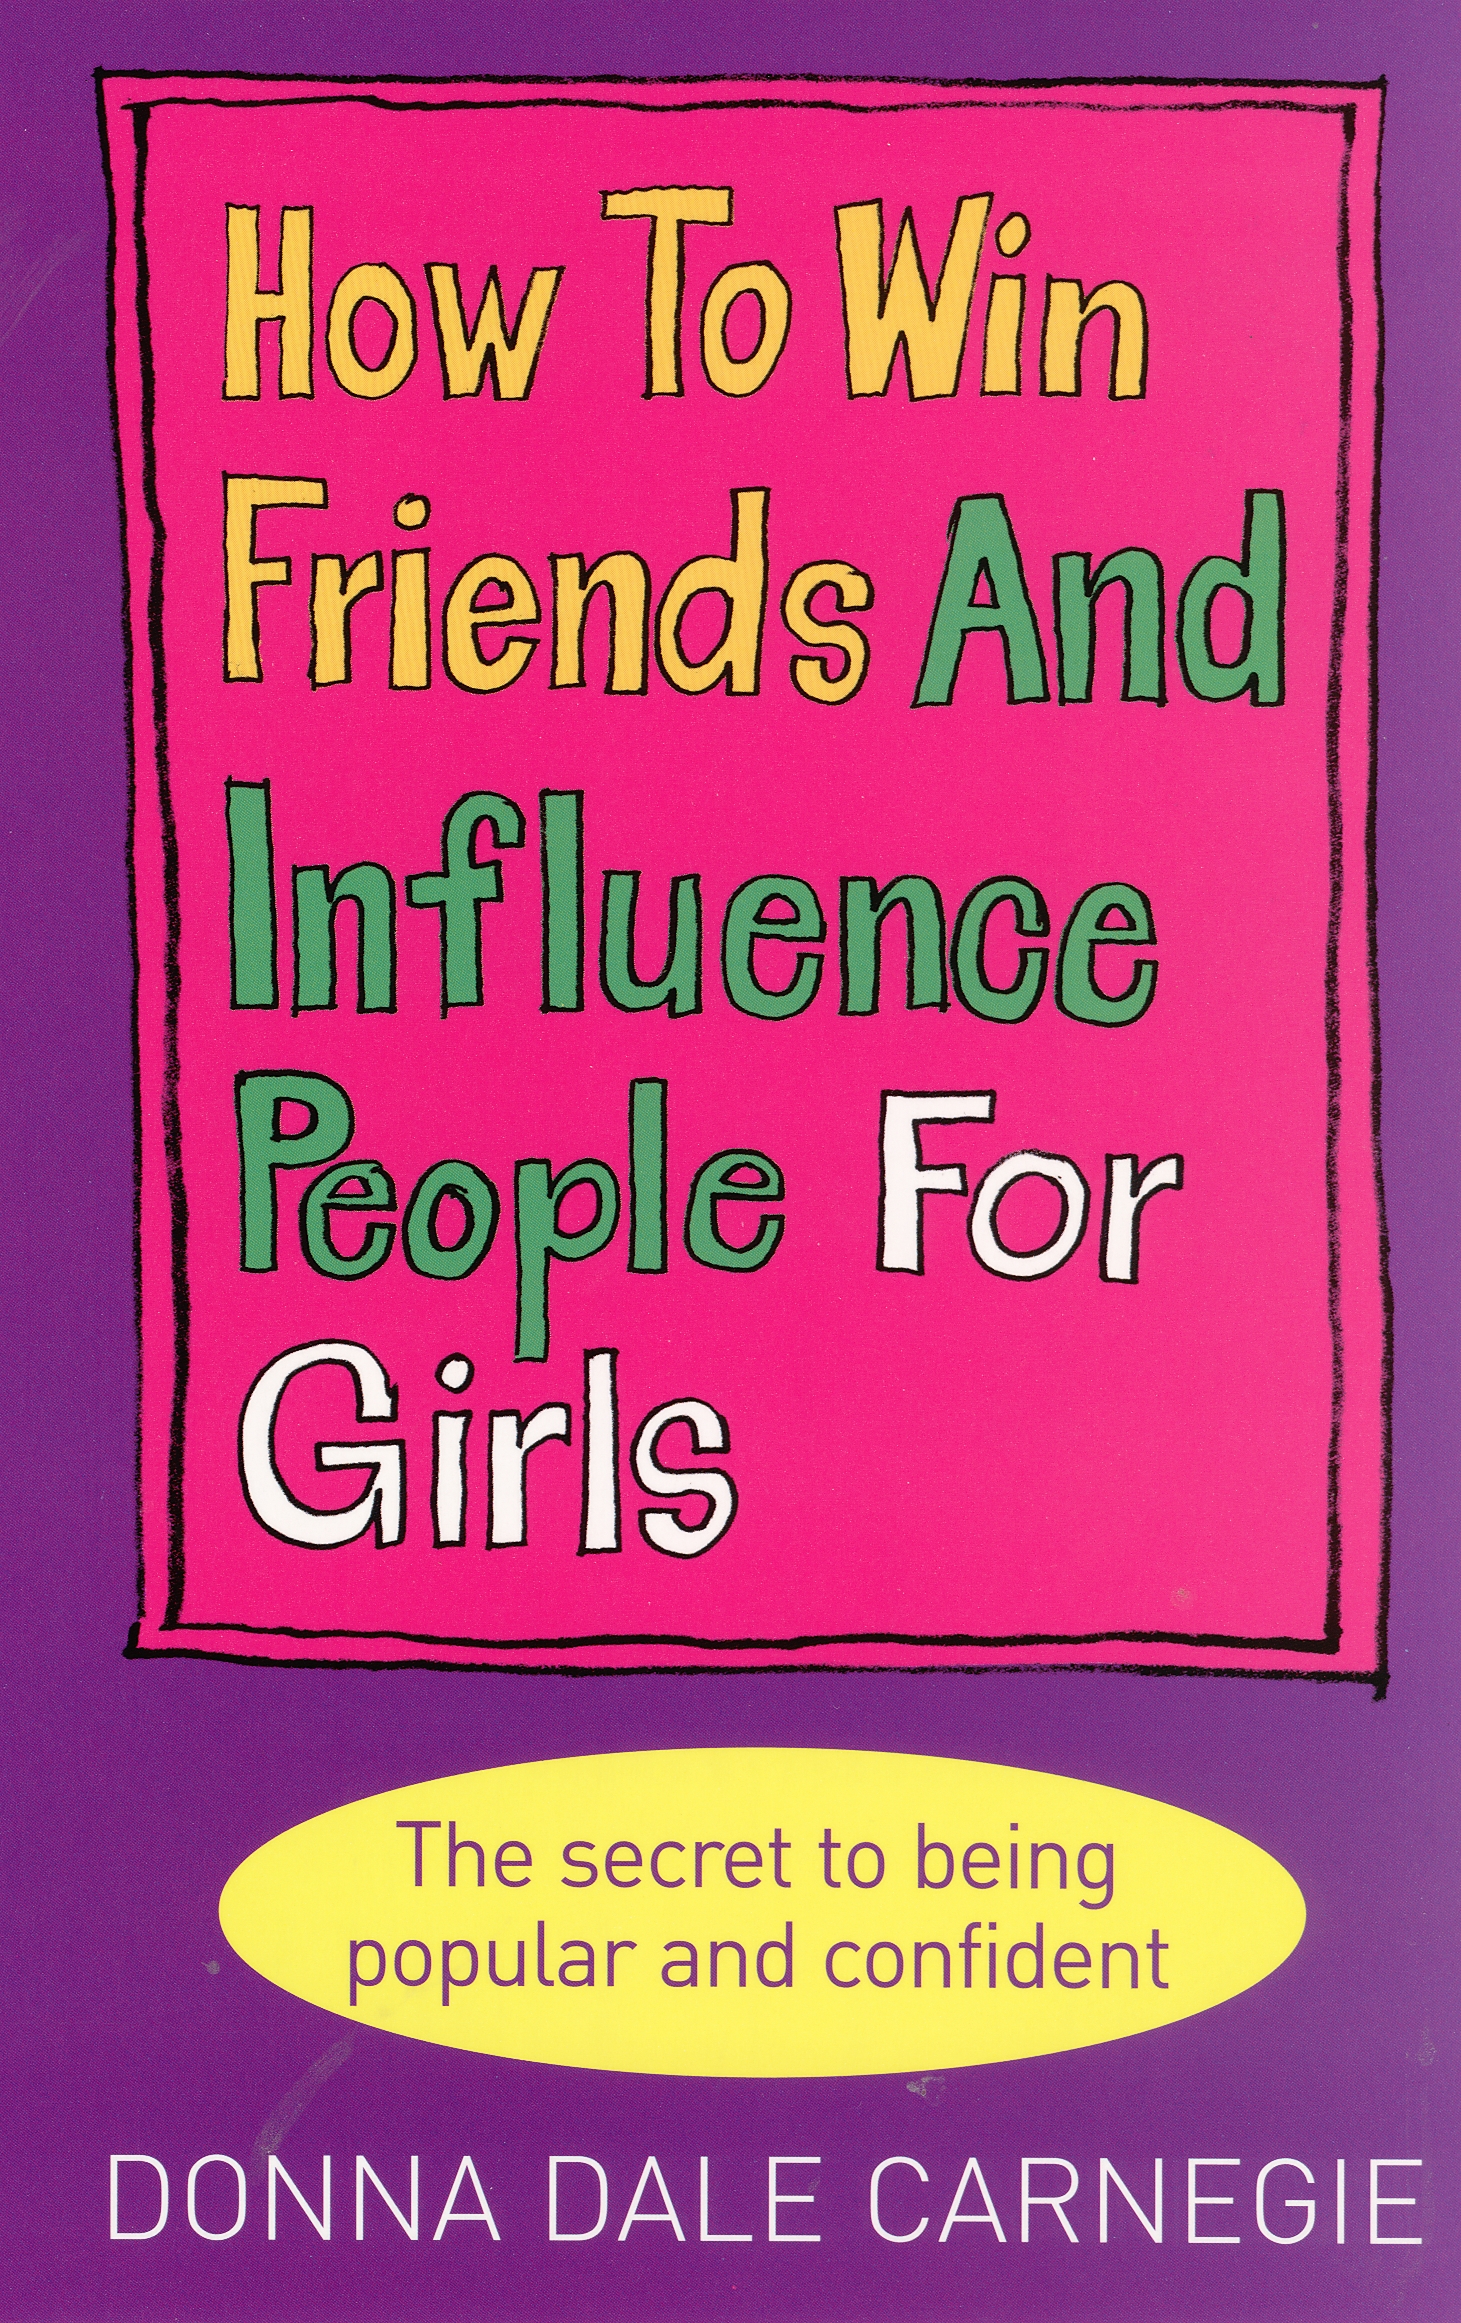 How to Win Friends and Influence People for android download